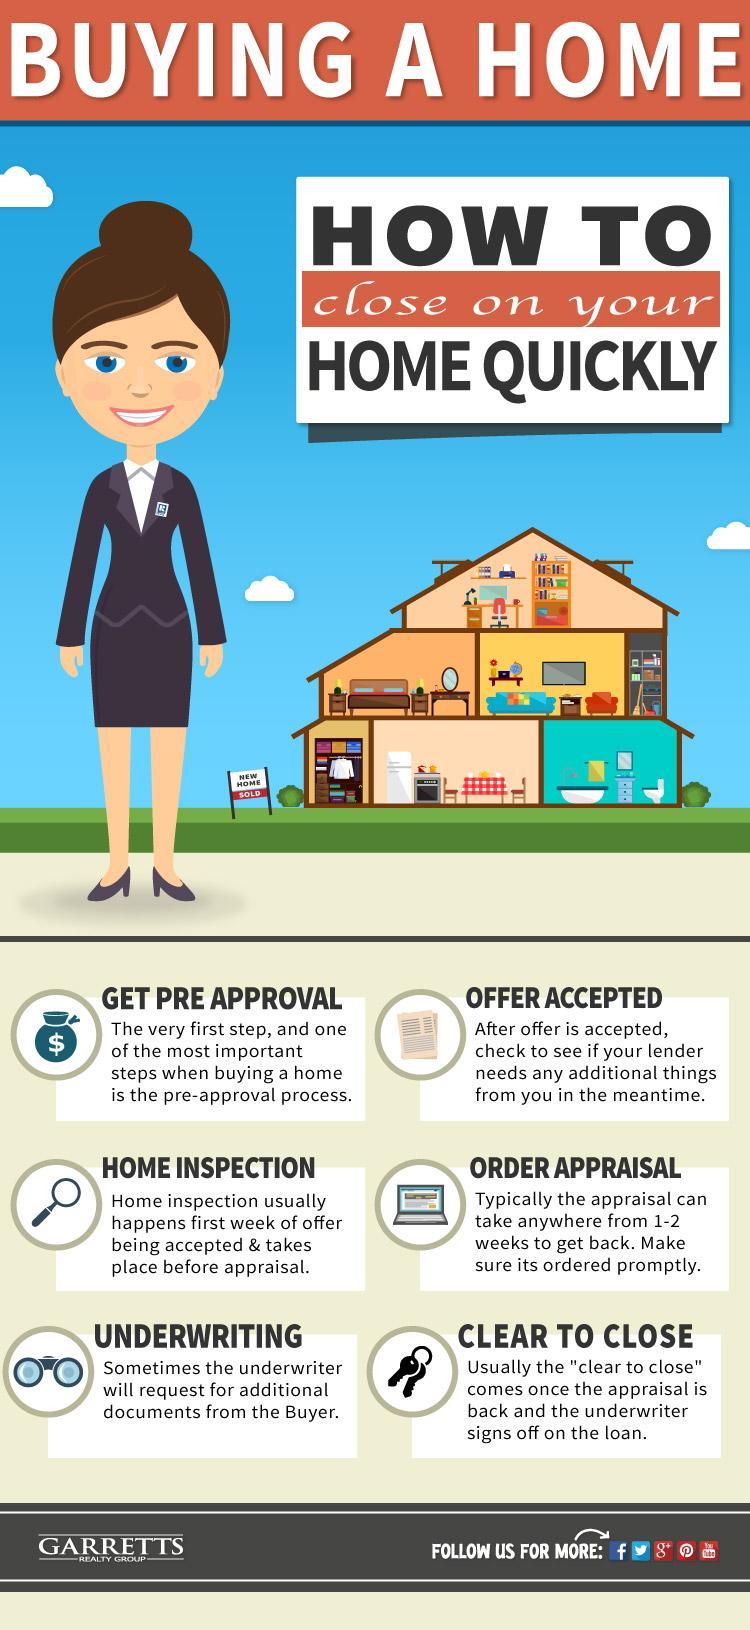 closing on a home quickly infographic